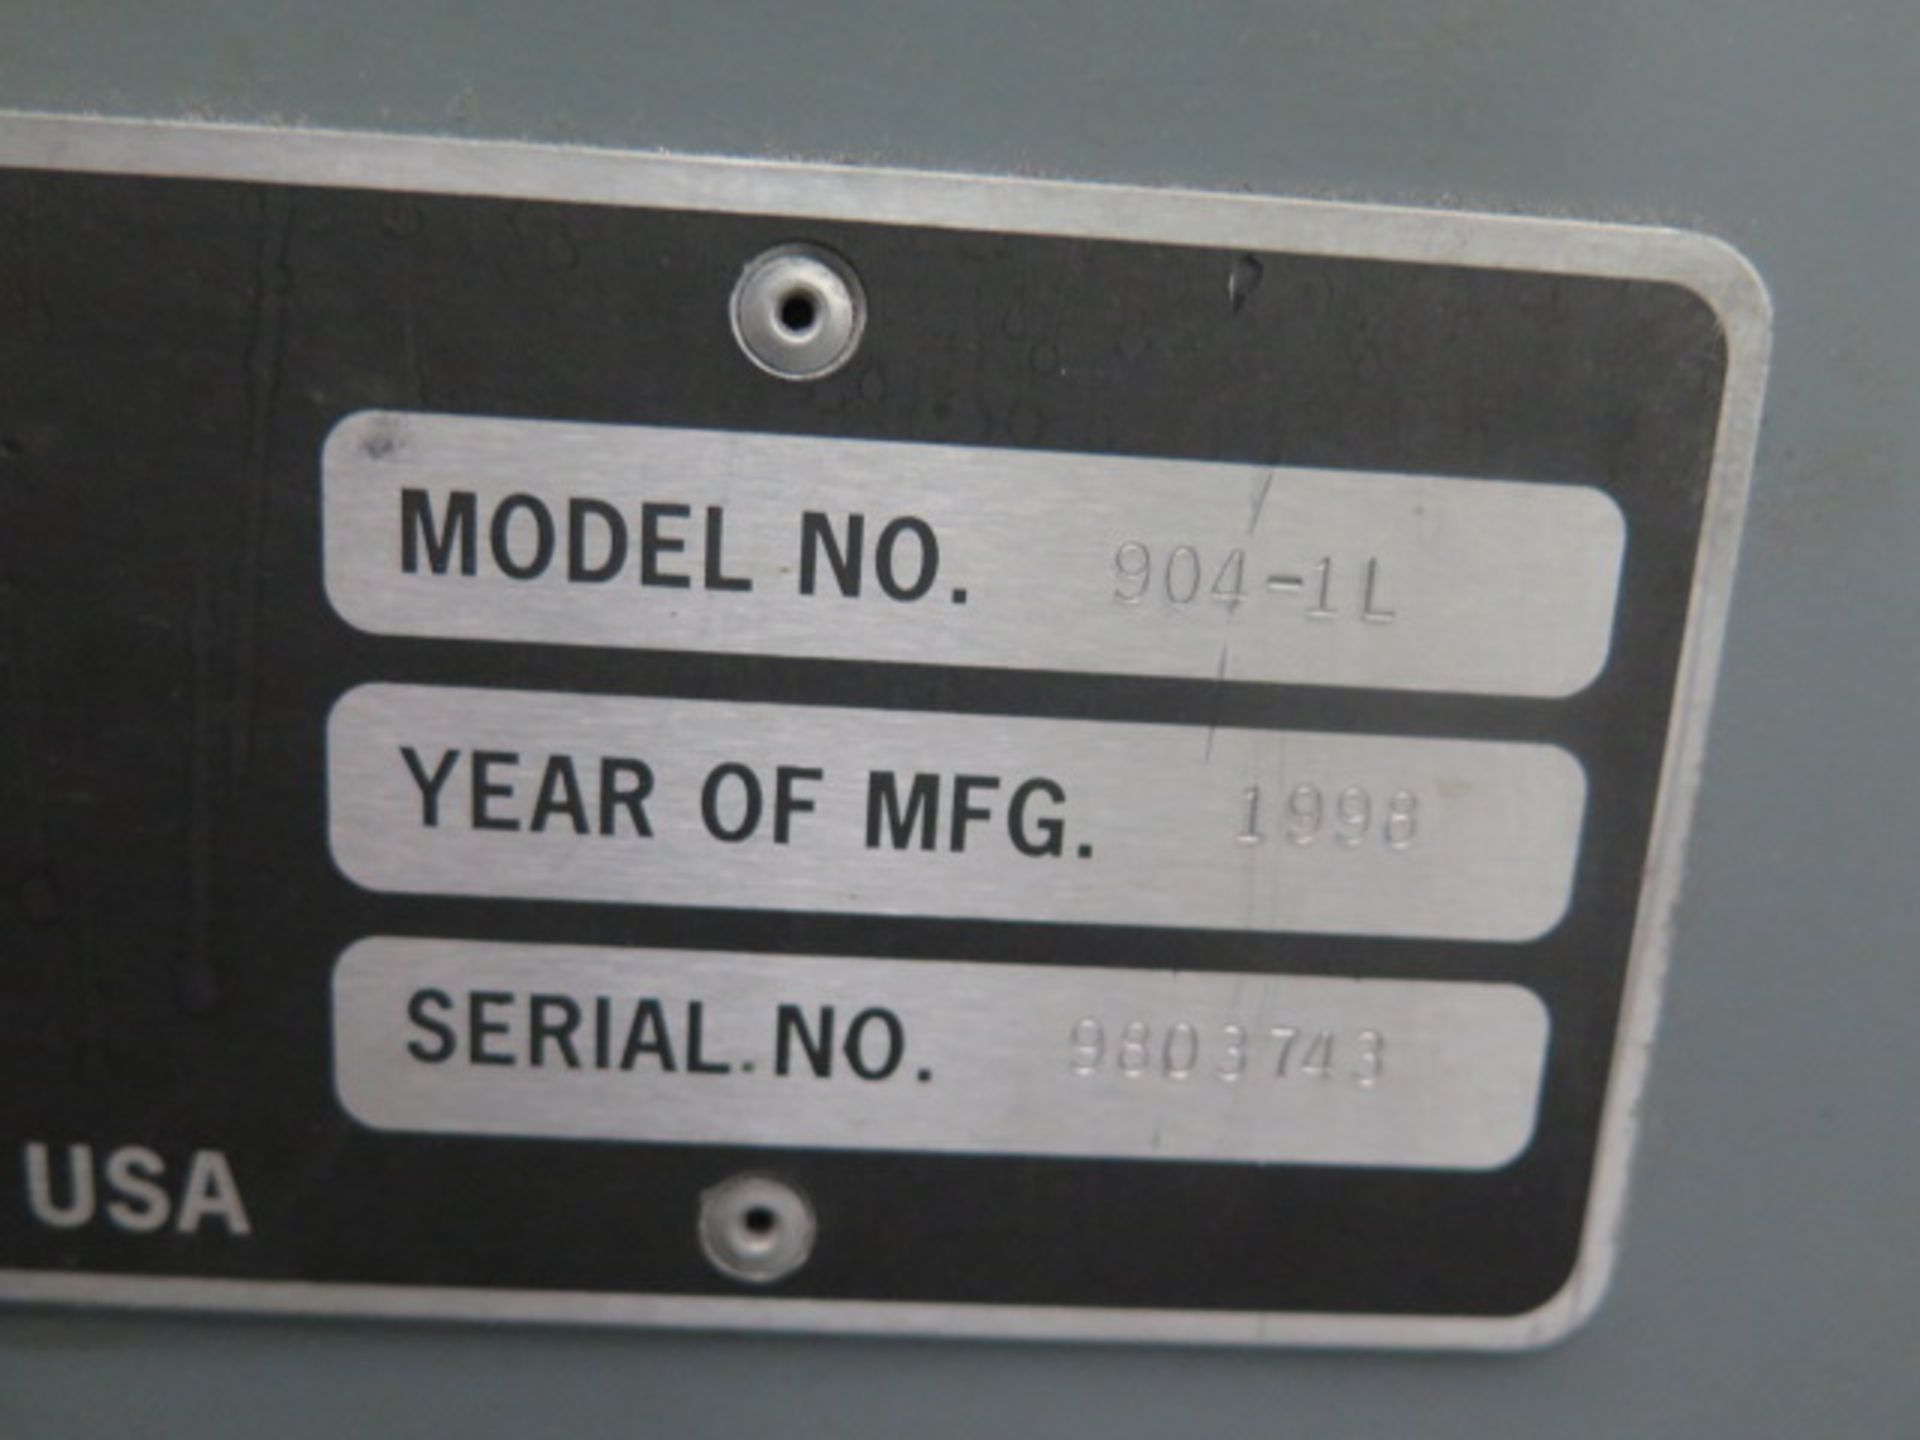 1998 Fadal VMC 3016L CNC Vertical Machining Center s/n 9803743 w/ Fadal CNC88HS Controls, SOLD AS IS - Image 15 of 15